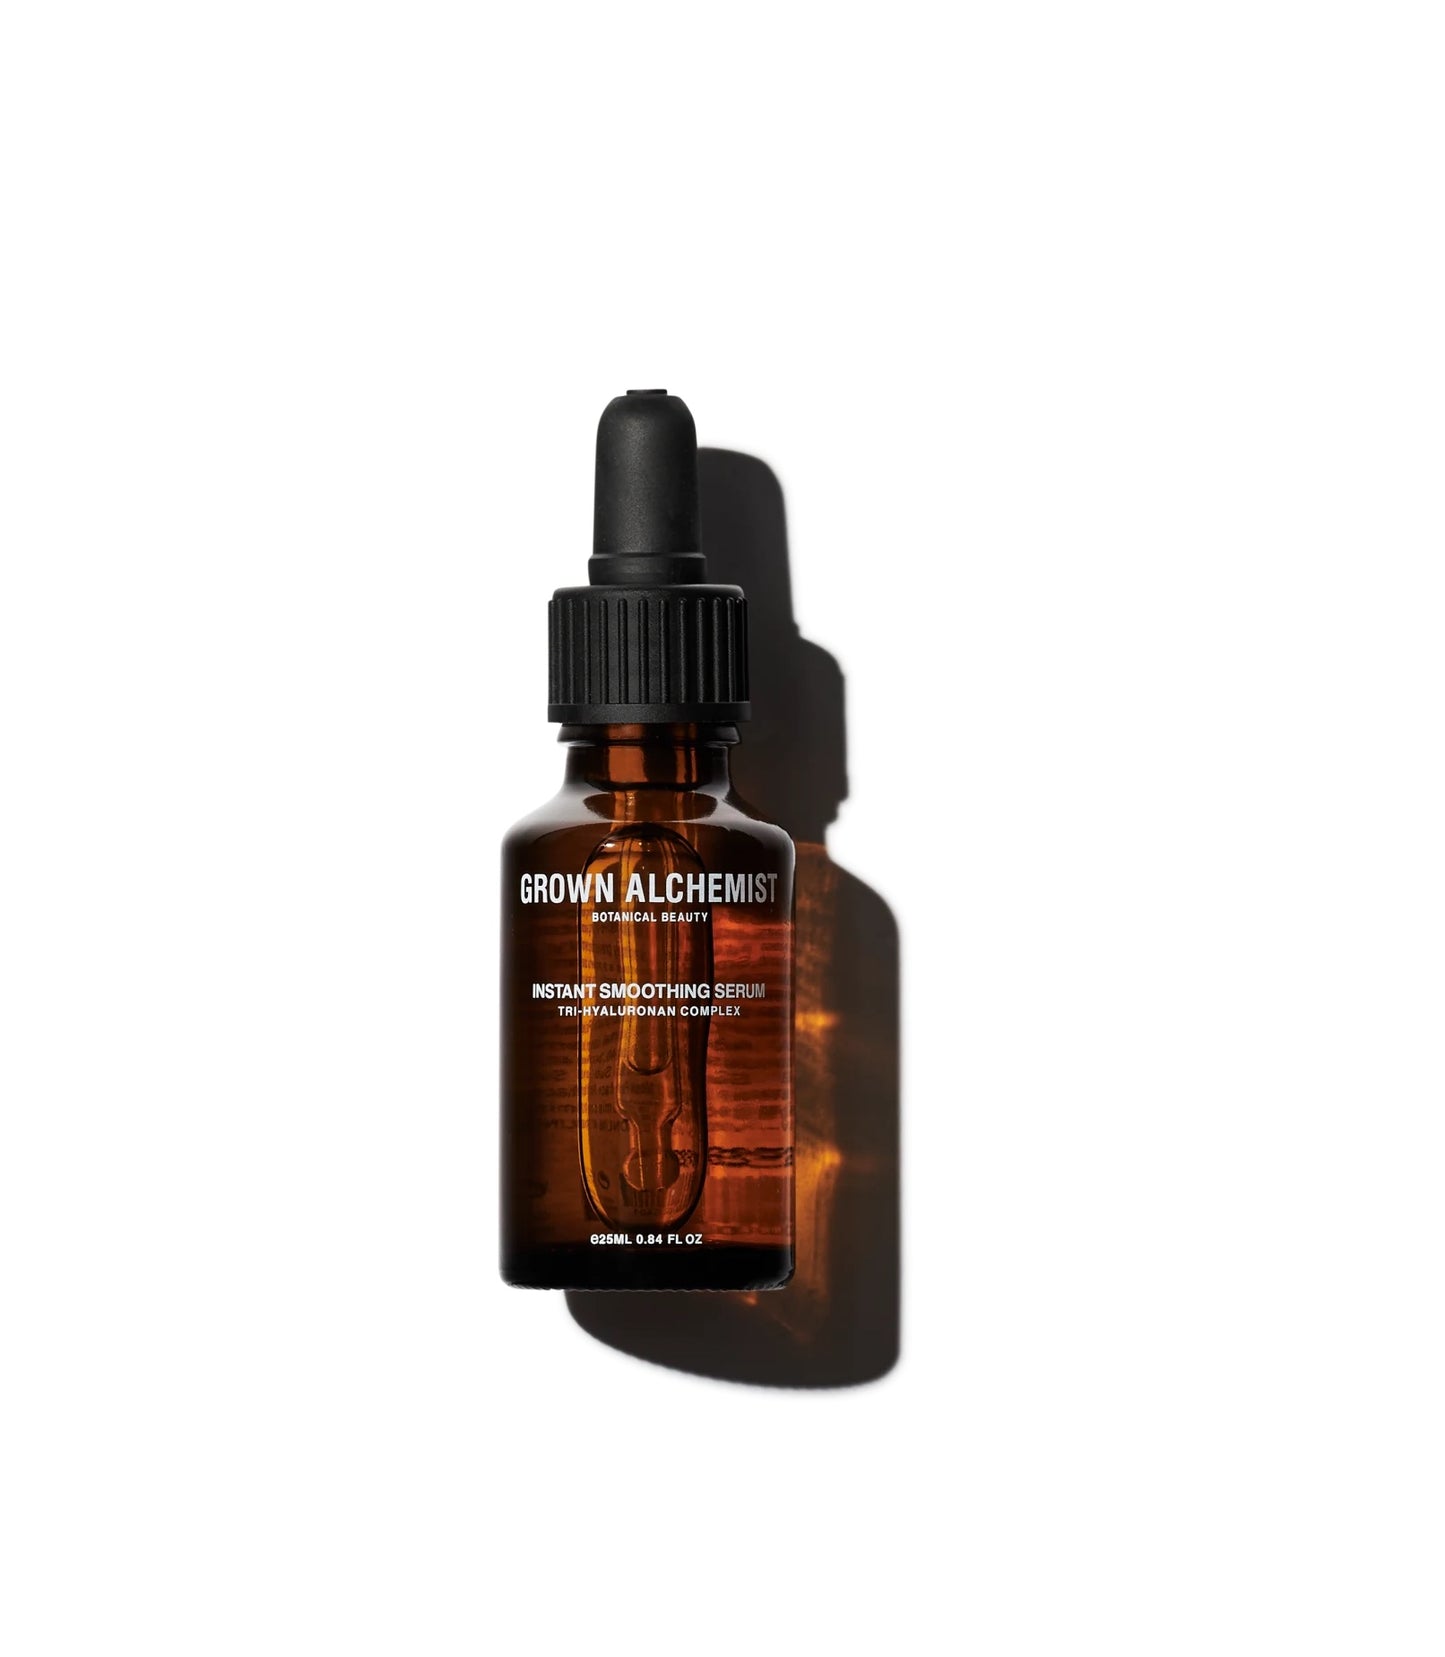 Instant Smoothing Serum: Try-Hyaluronan Complex